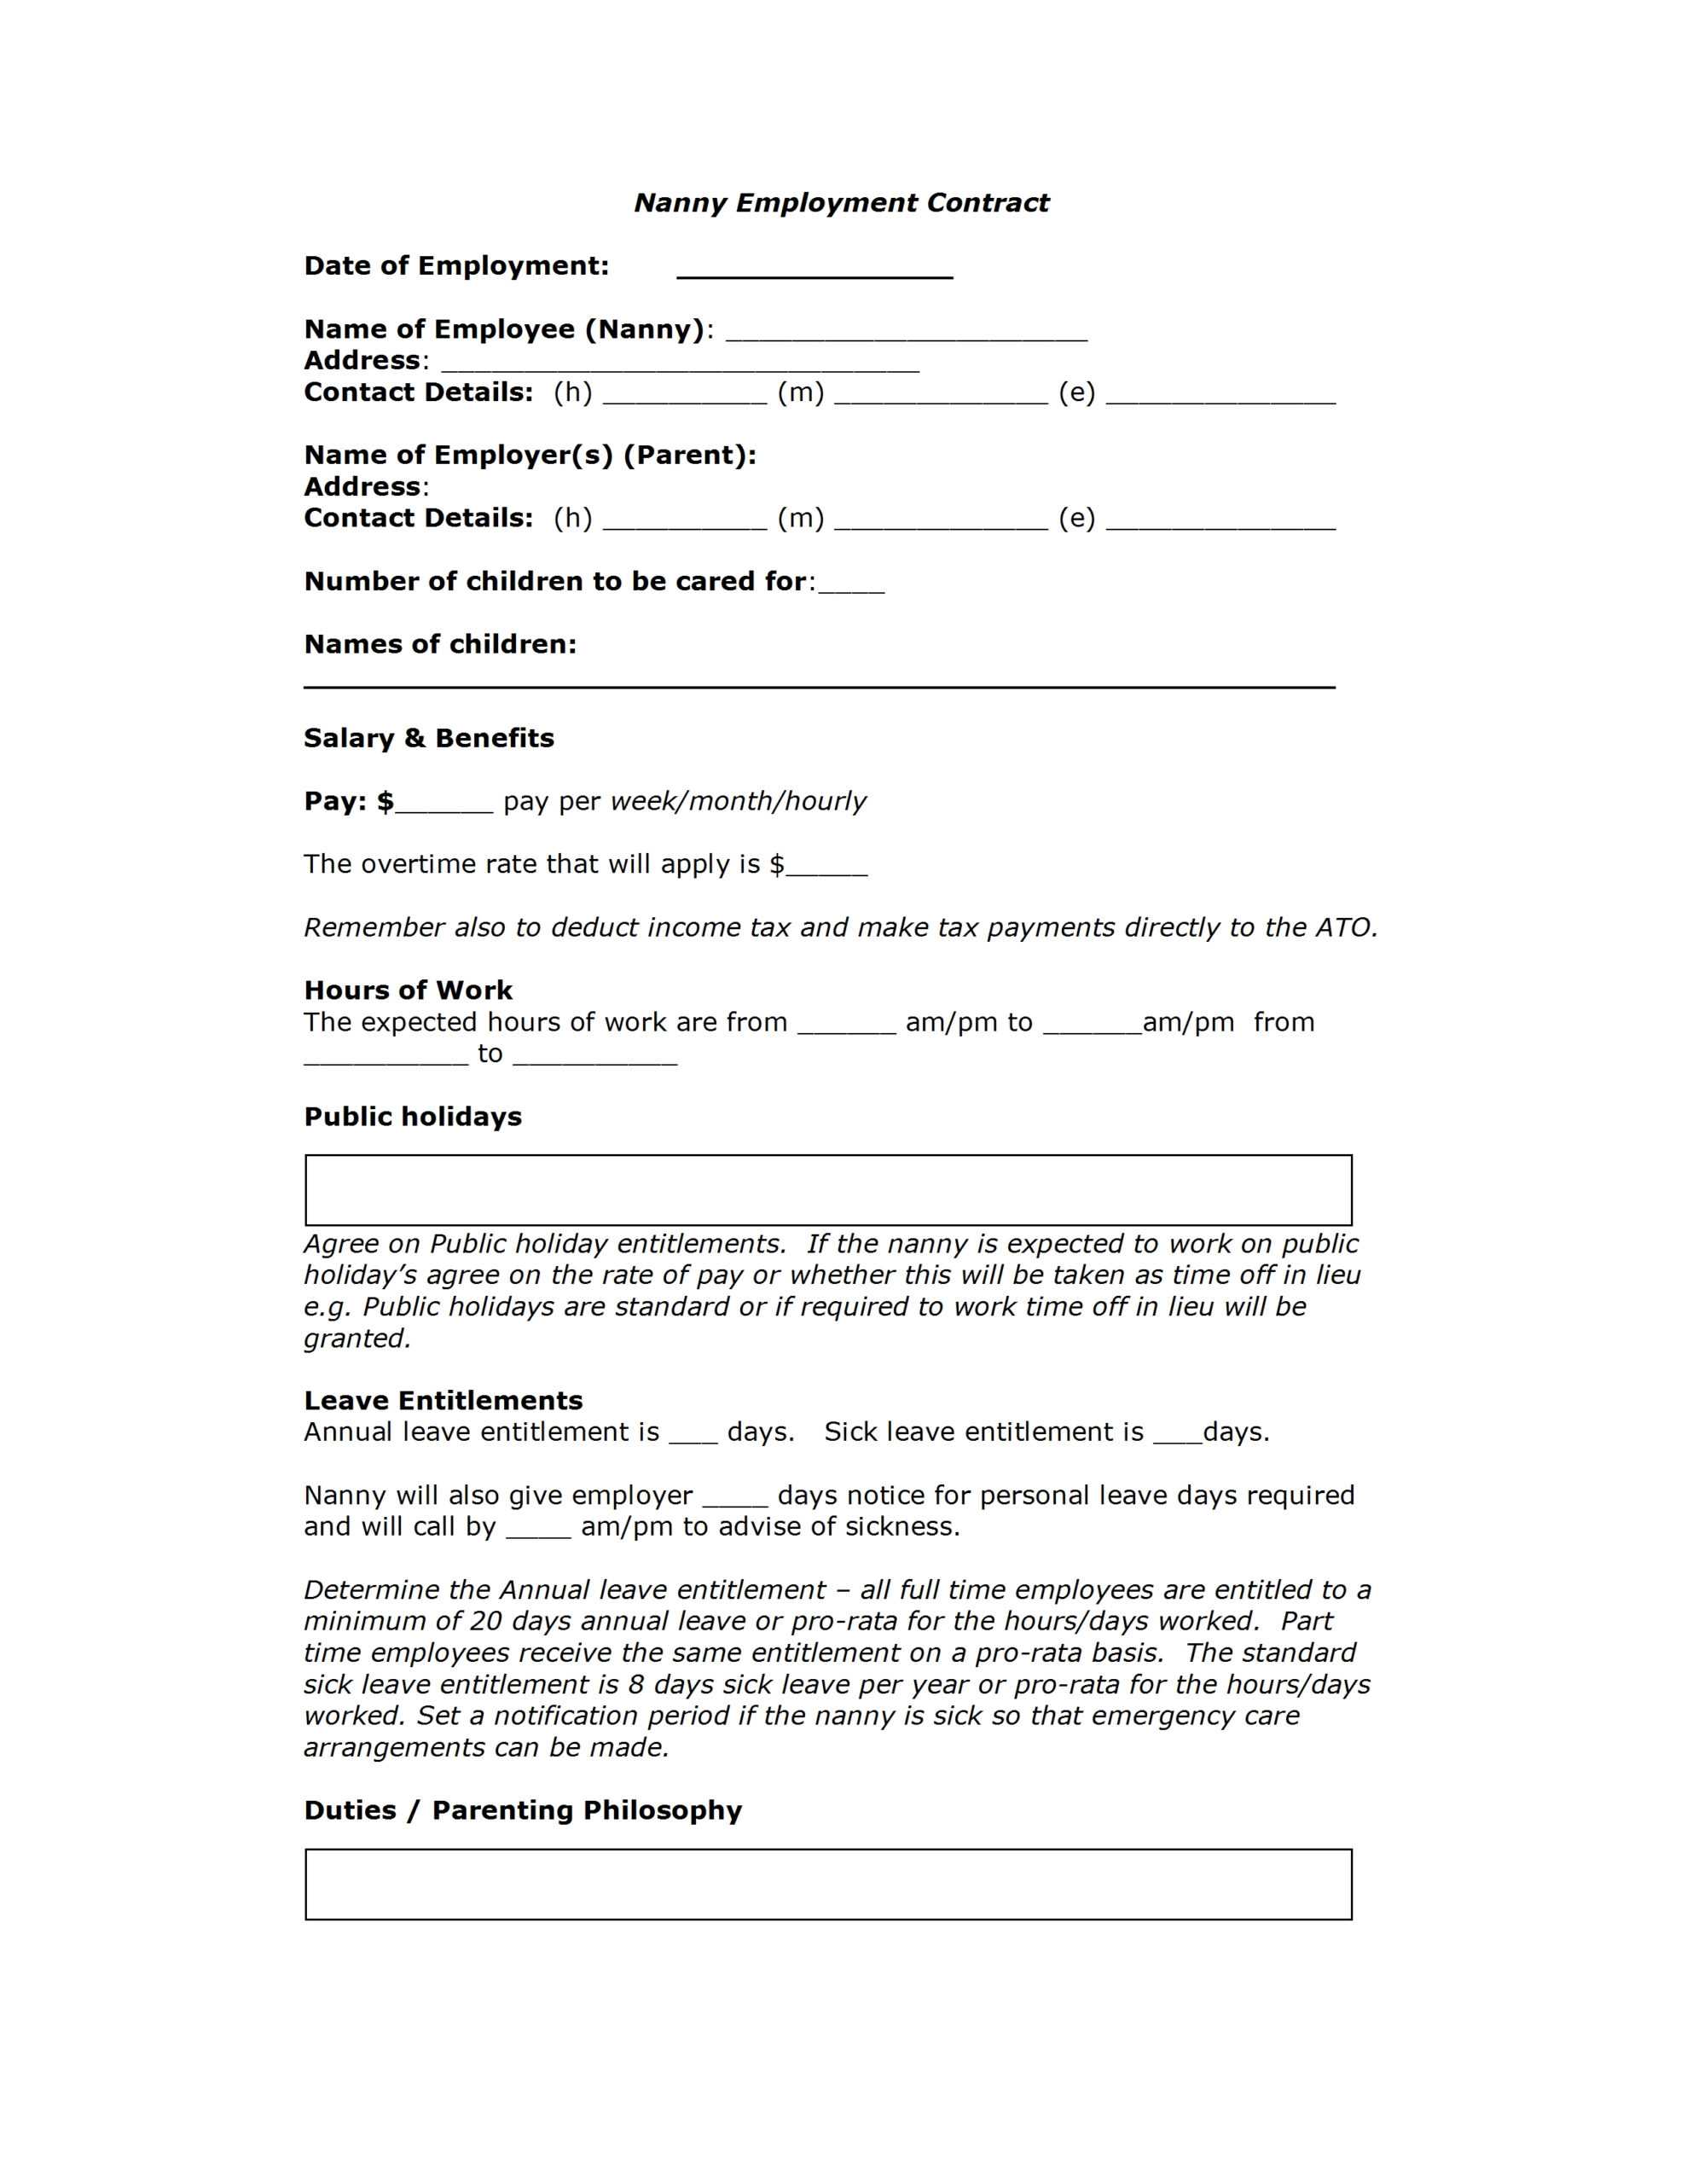 014 Nanny Employment Contract Template Ideas Microsoft With Nanny Contract Template Word